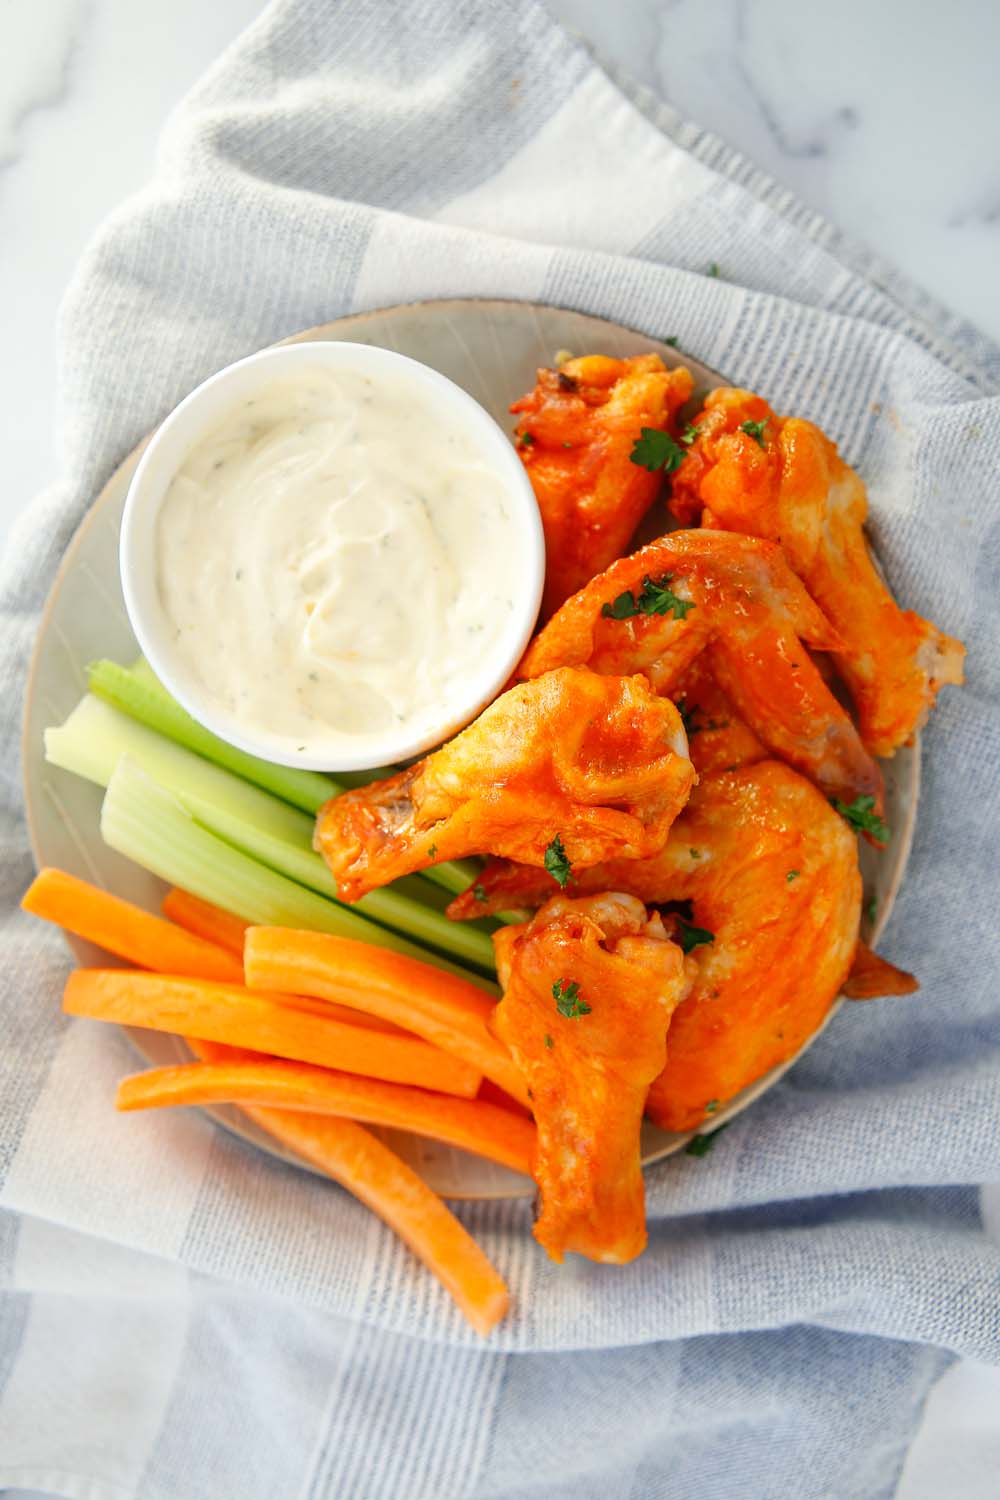 Baked Chicken Wings with Buffalo Sauce